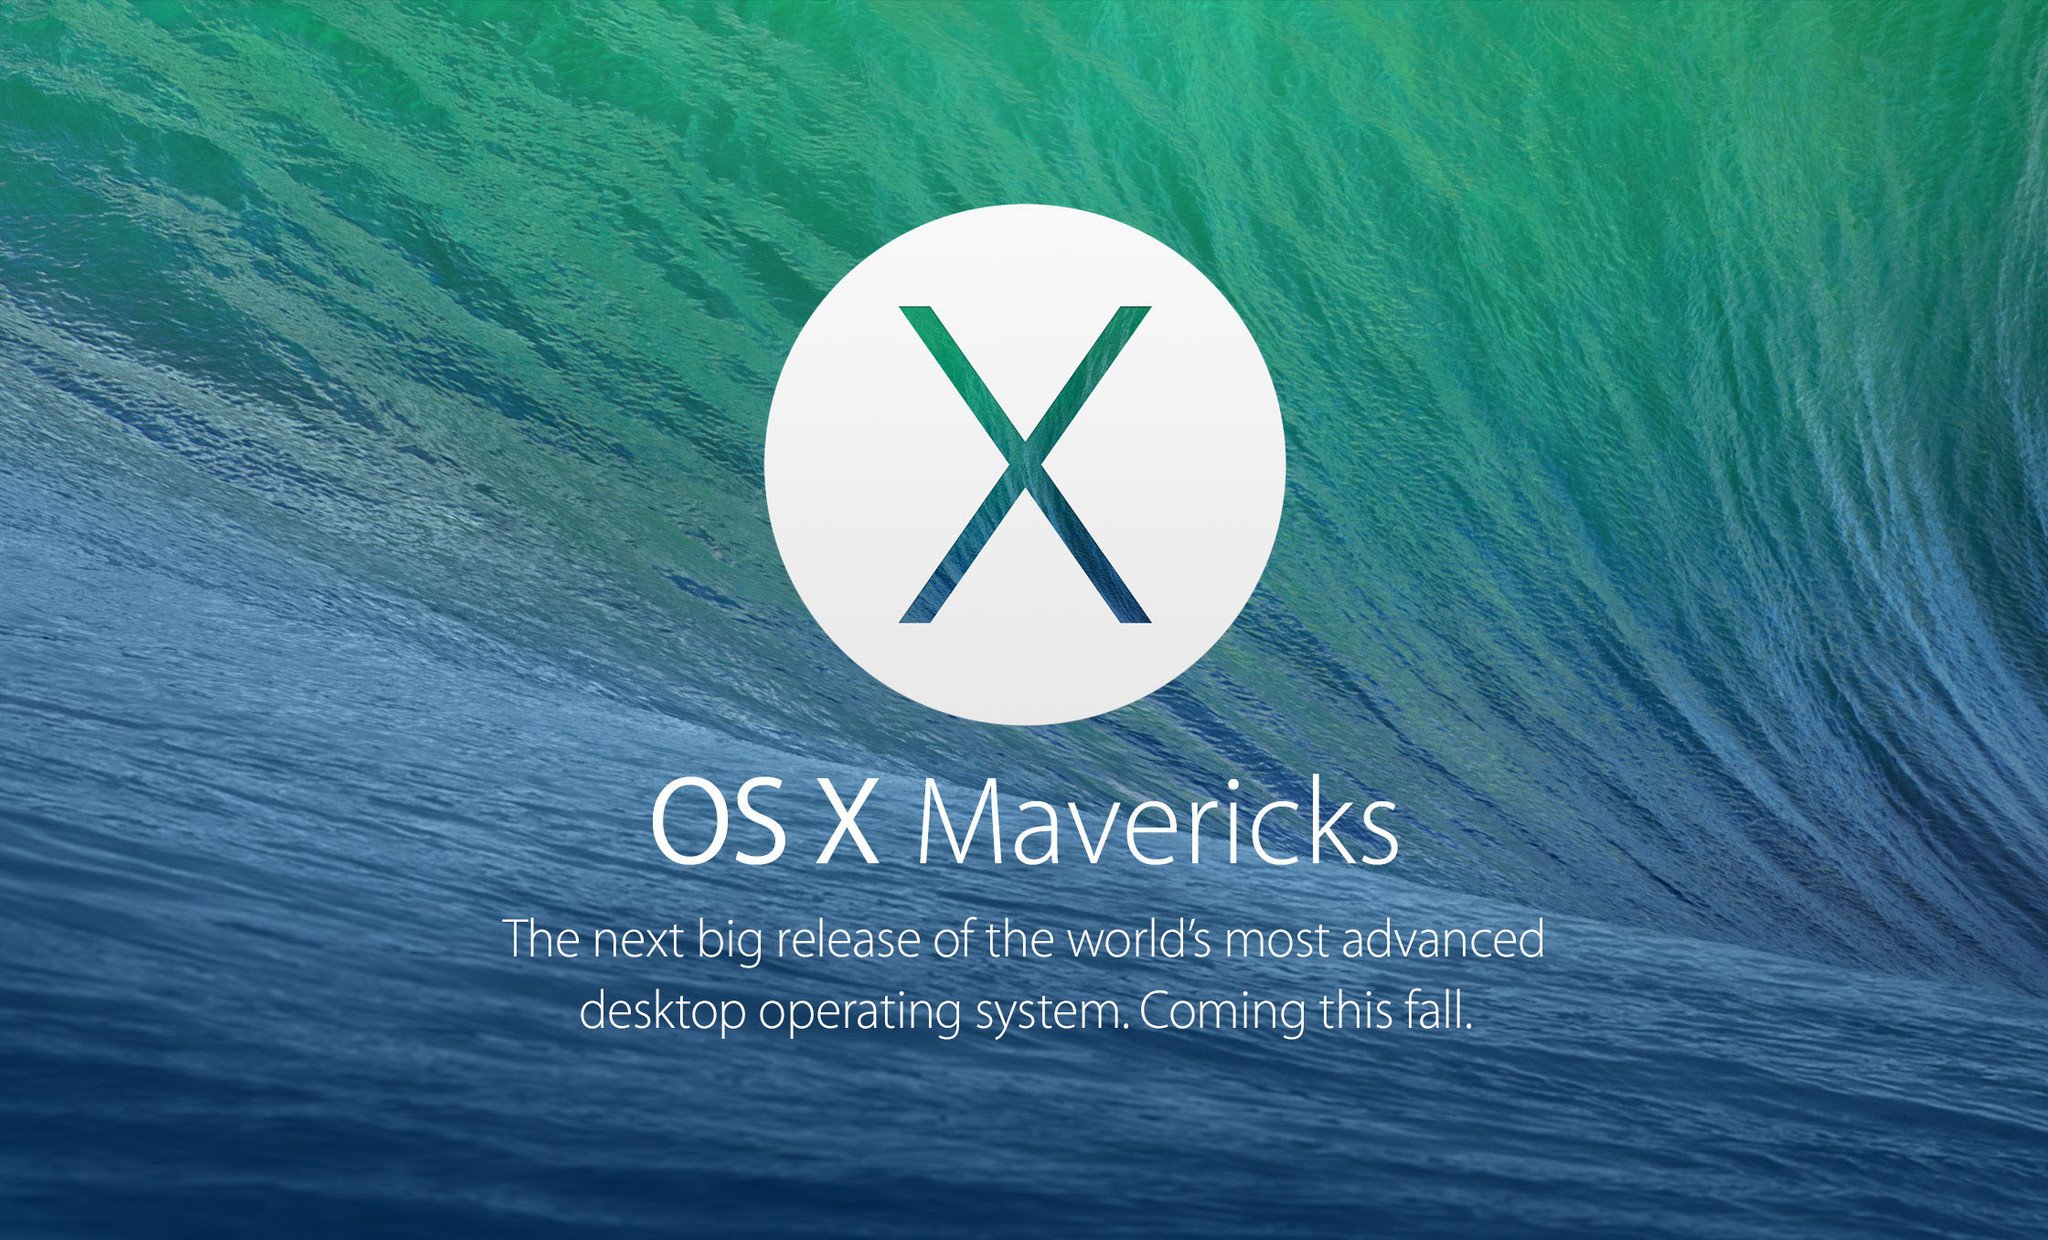 Mavericks 10.9.1 improves Gmail support and other Mail issues, more